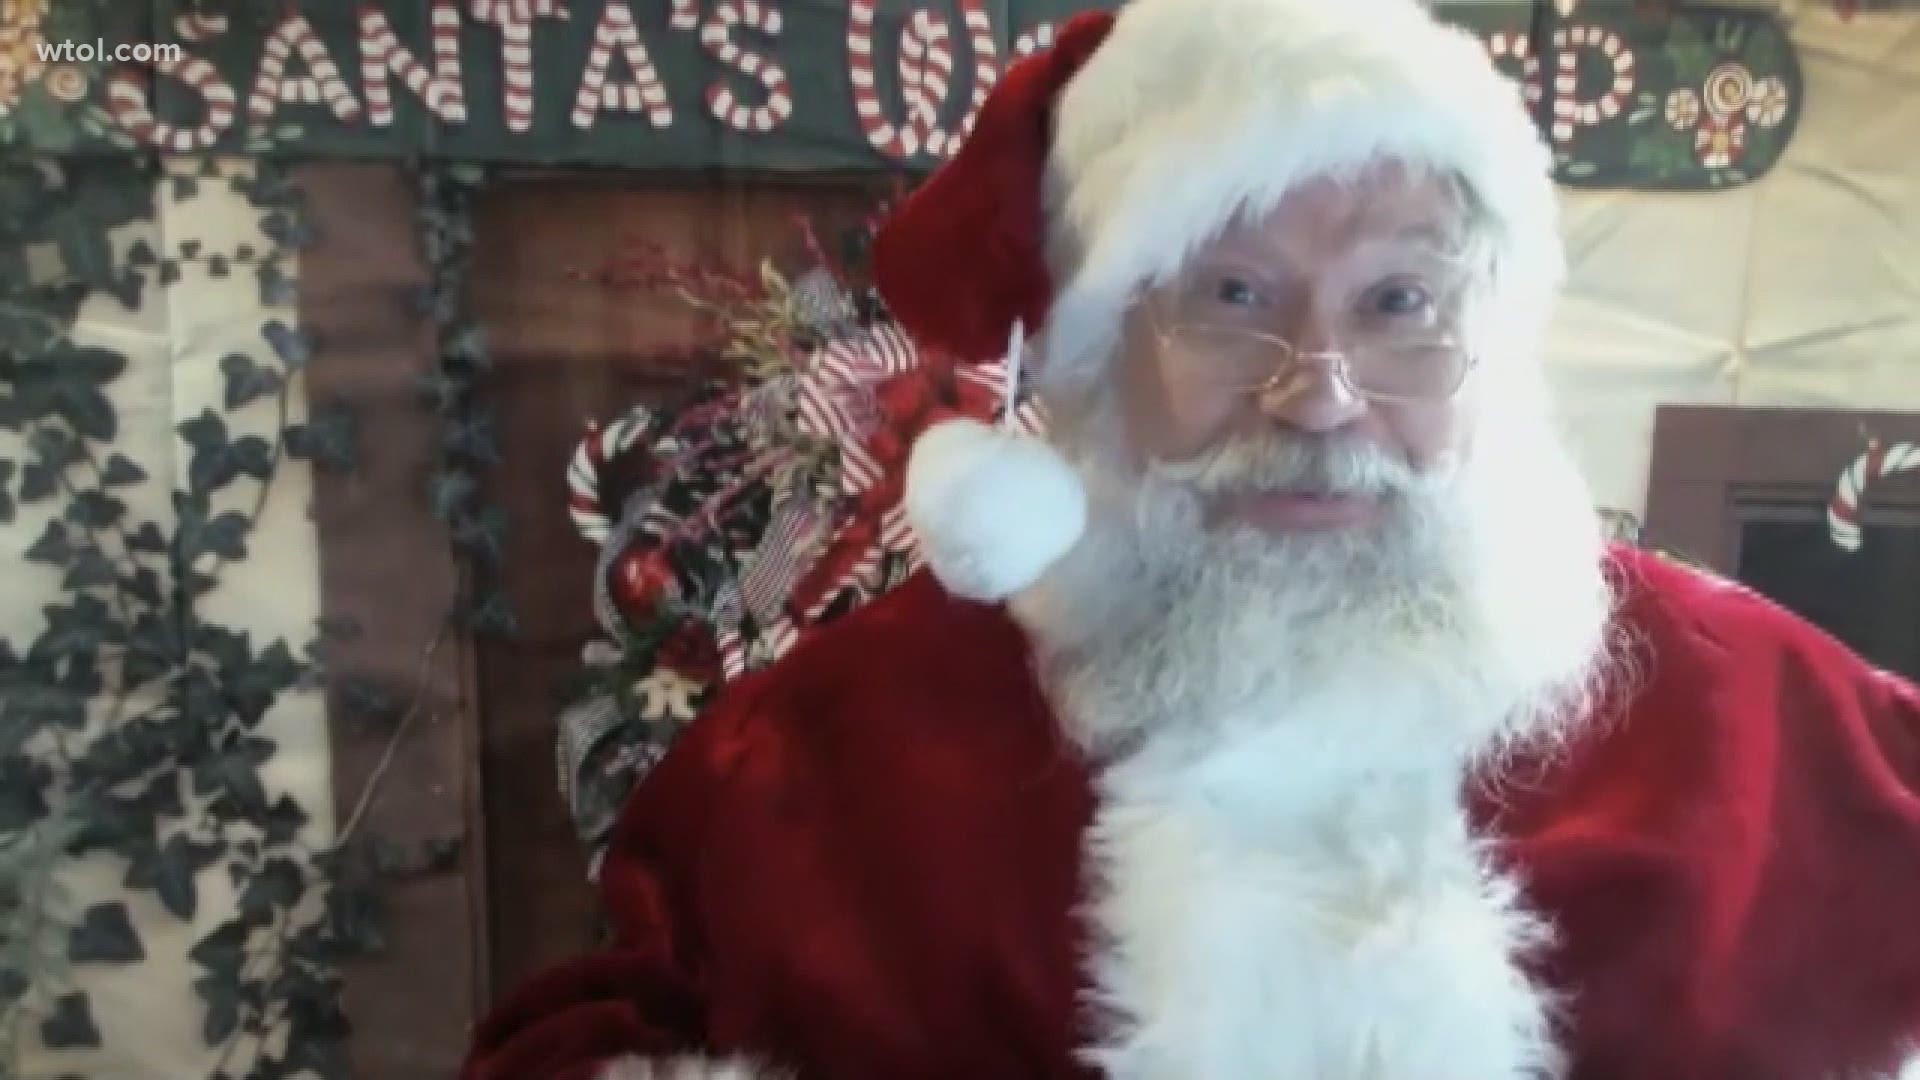 Santa answered some of the questions he hears the most ahead of his busiest day of the year.